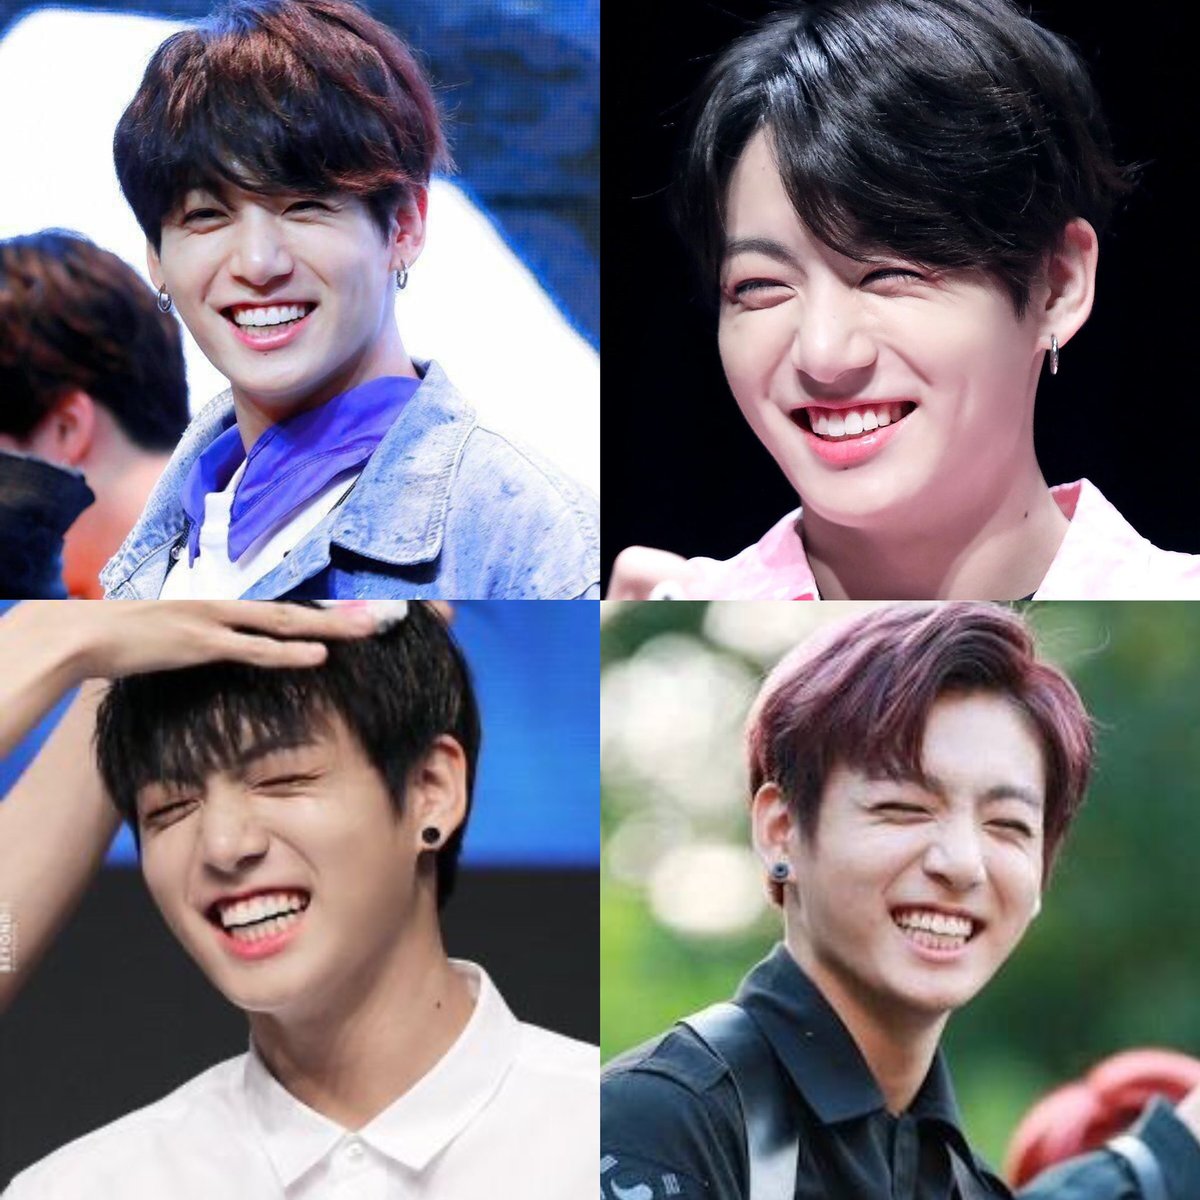 Jungkook’s beautiful eye smile and the habit of covering his nose while he yawns 